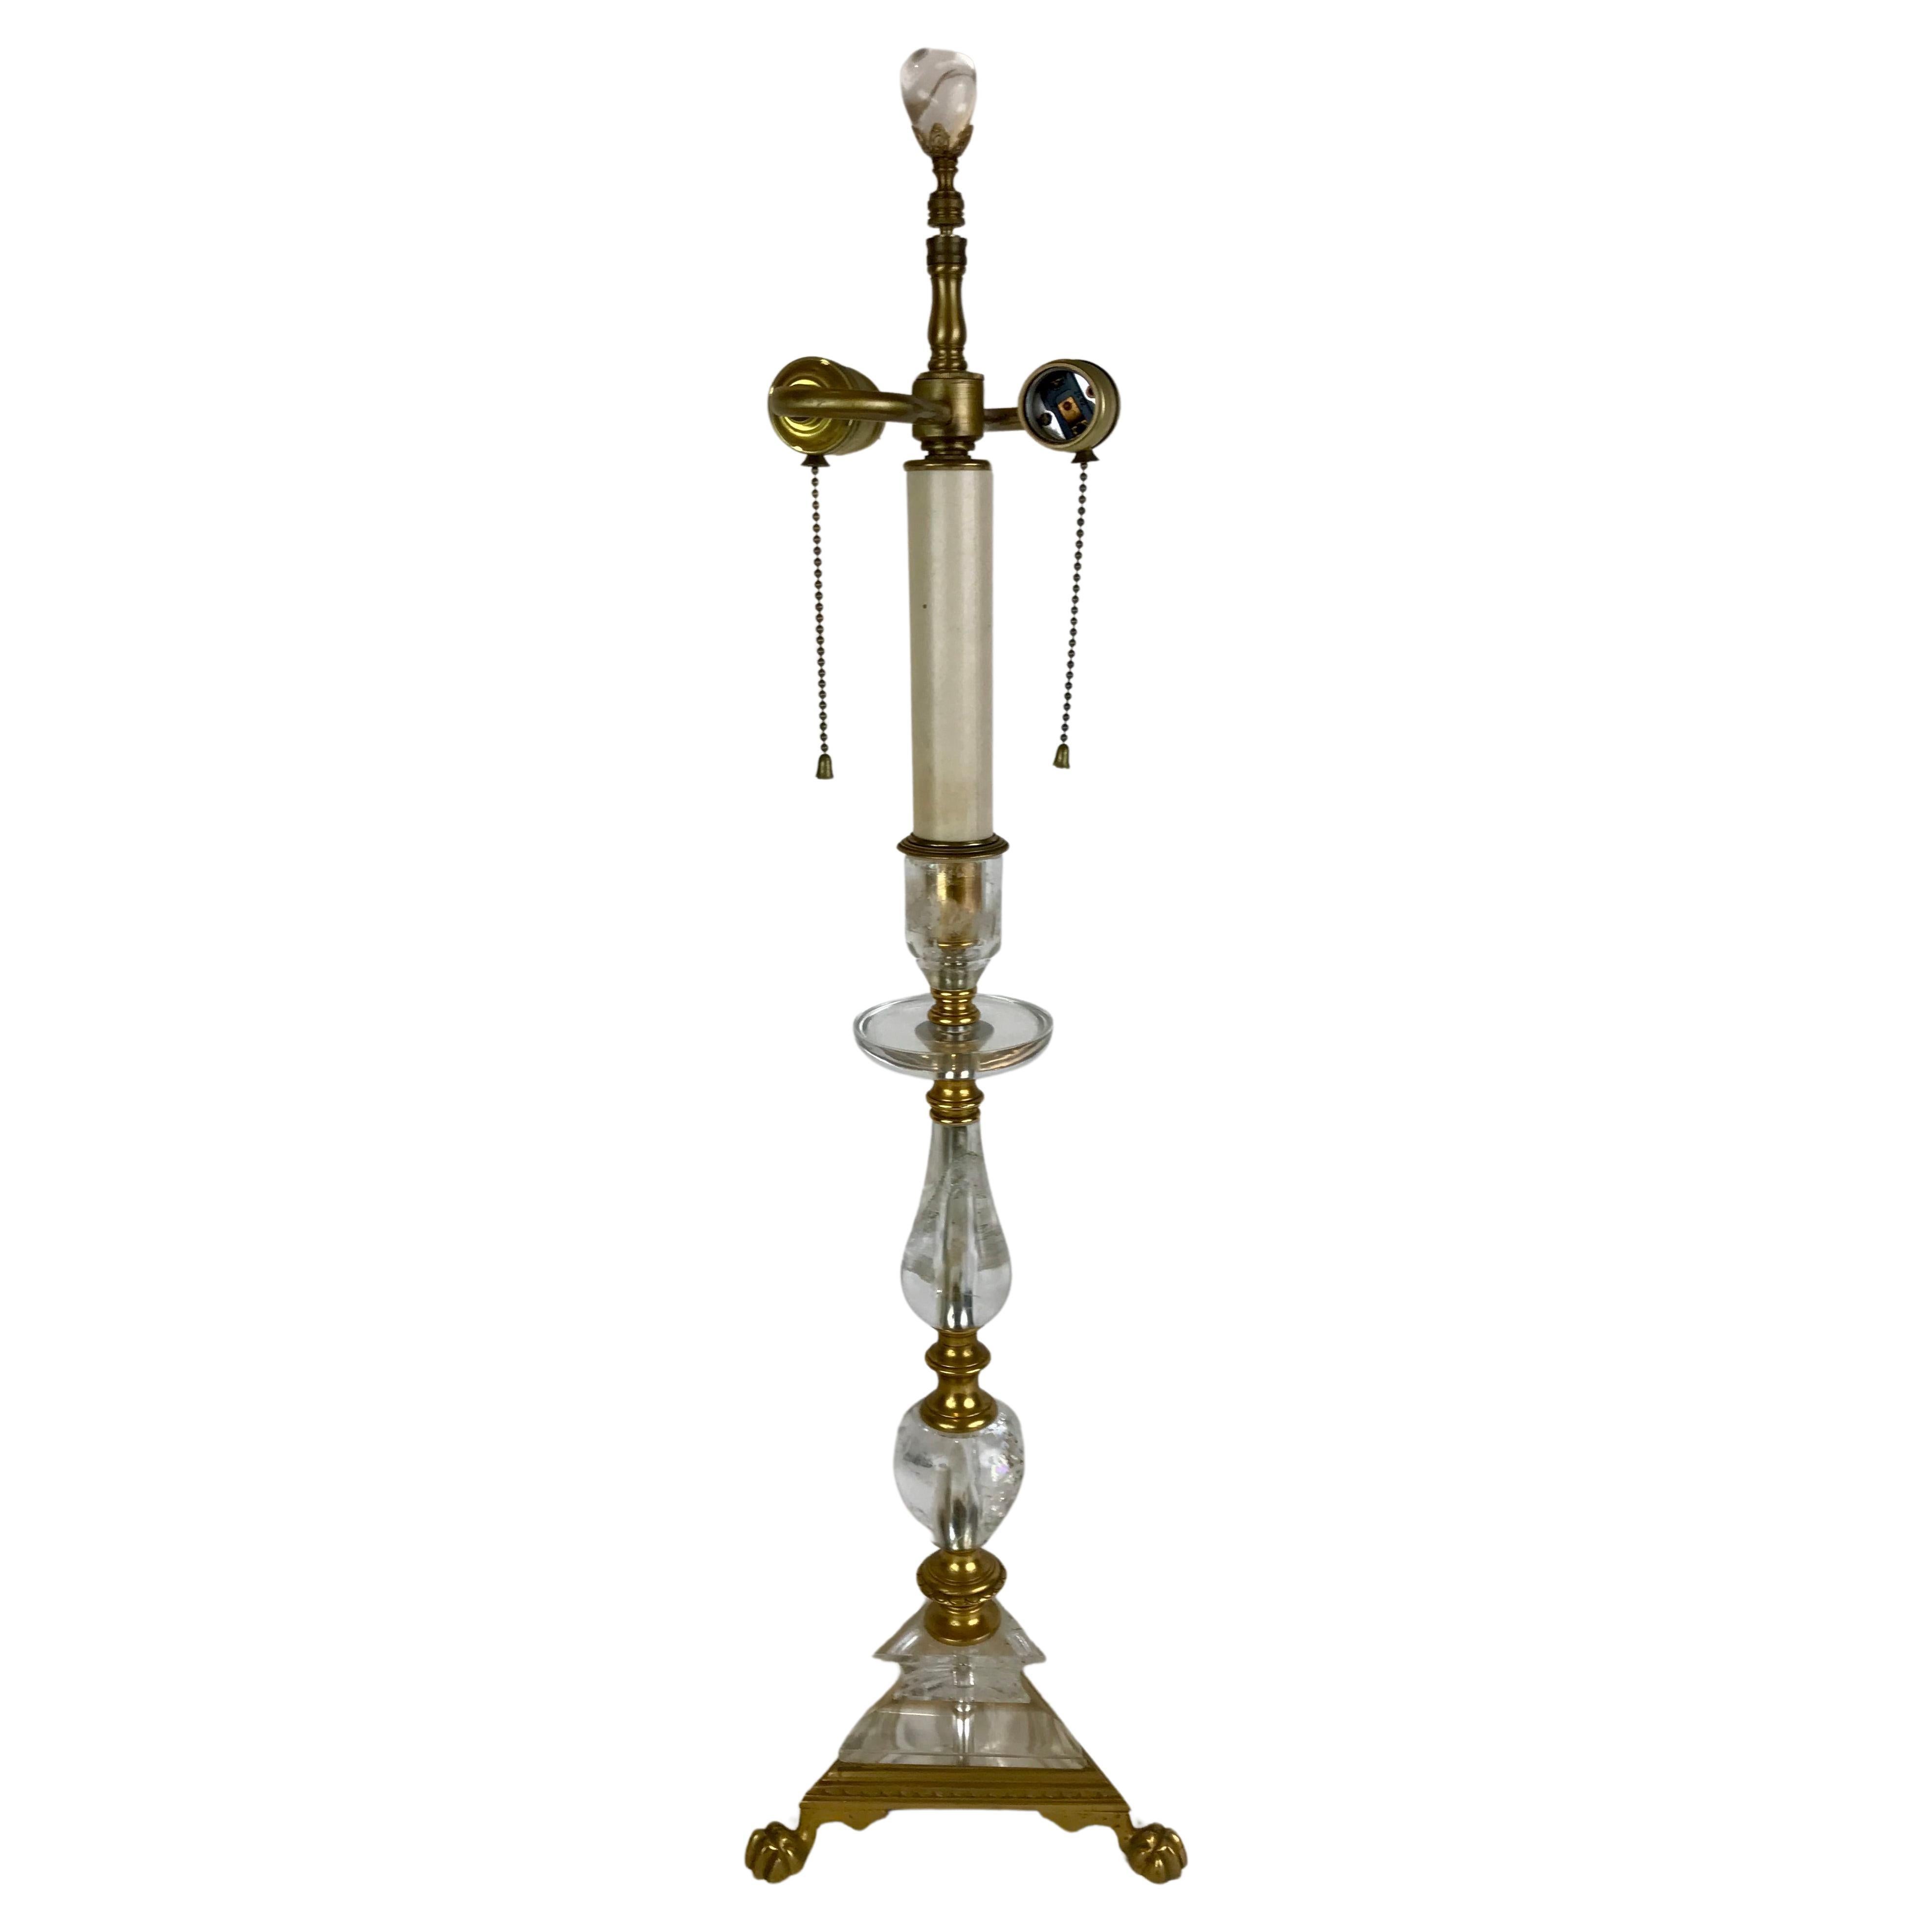 Rock Crystal and Gilt Bronze Pricket Form Lamp Attributed to F. F. Caldwell